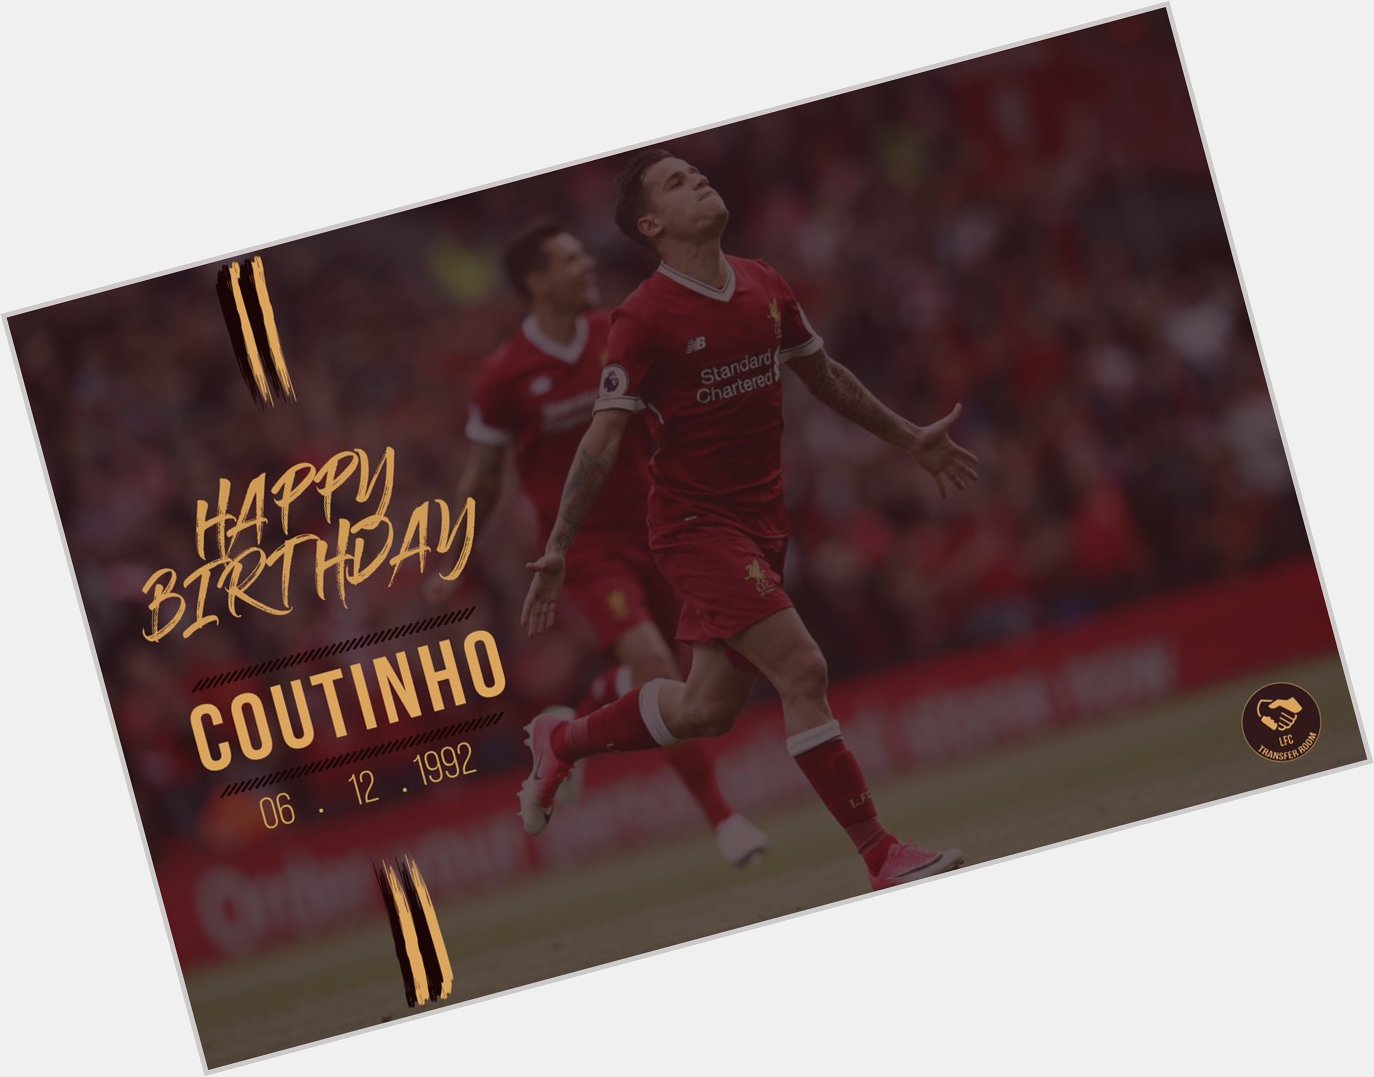   Happy Birthday to our magician Philippe Coutinho, who is turning 25 years old today! 

O Mágico! 